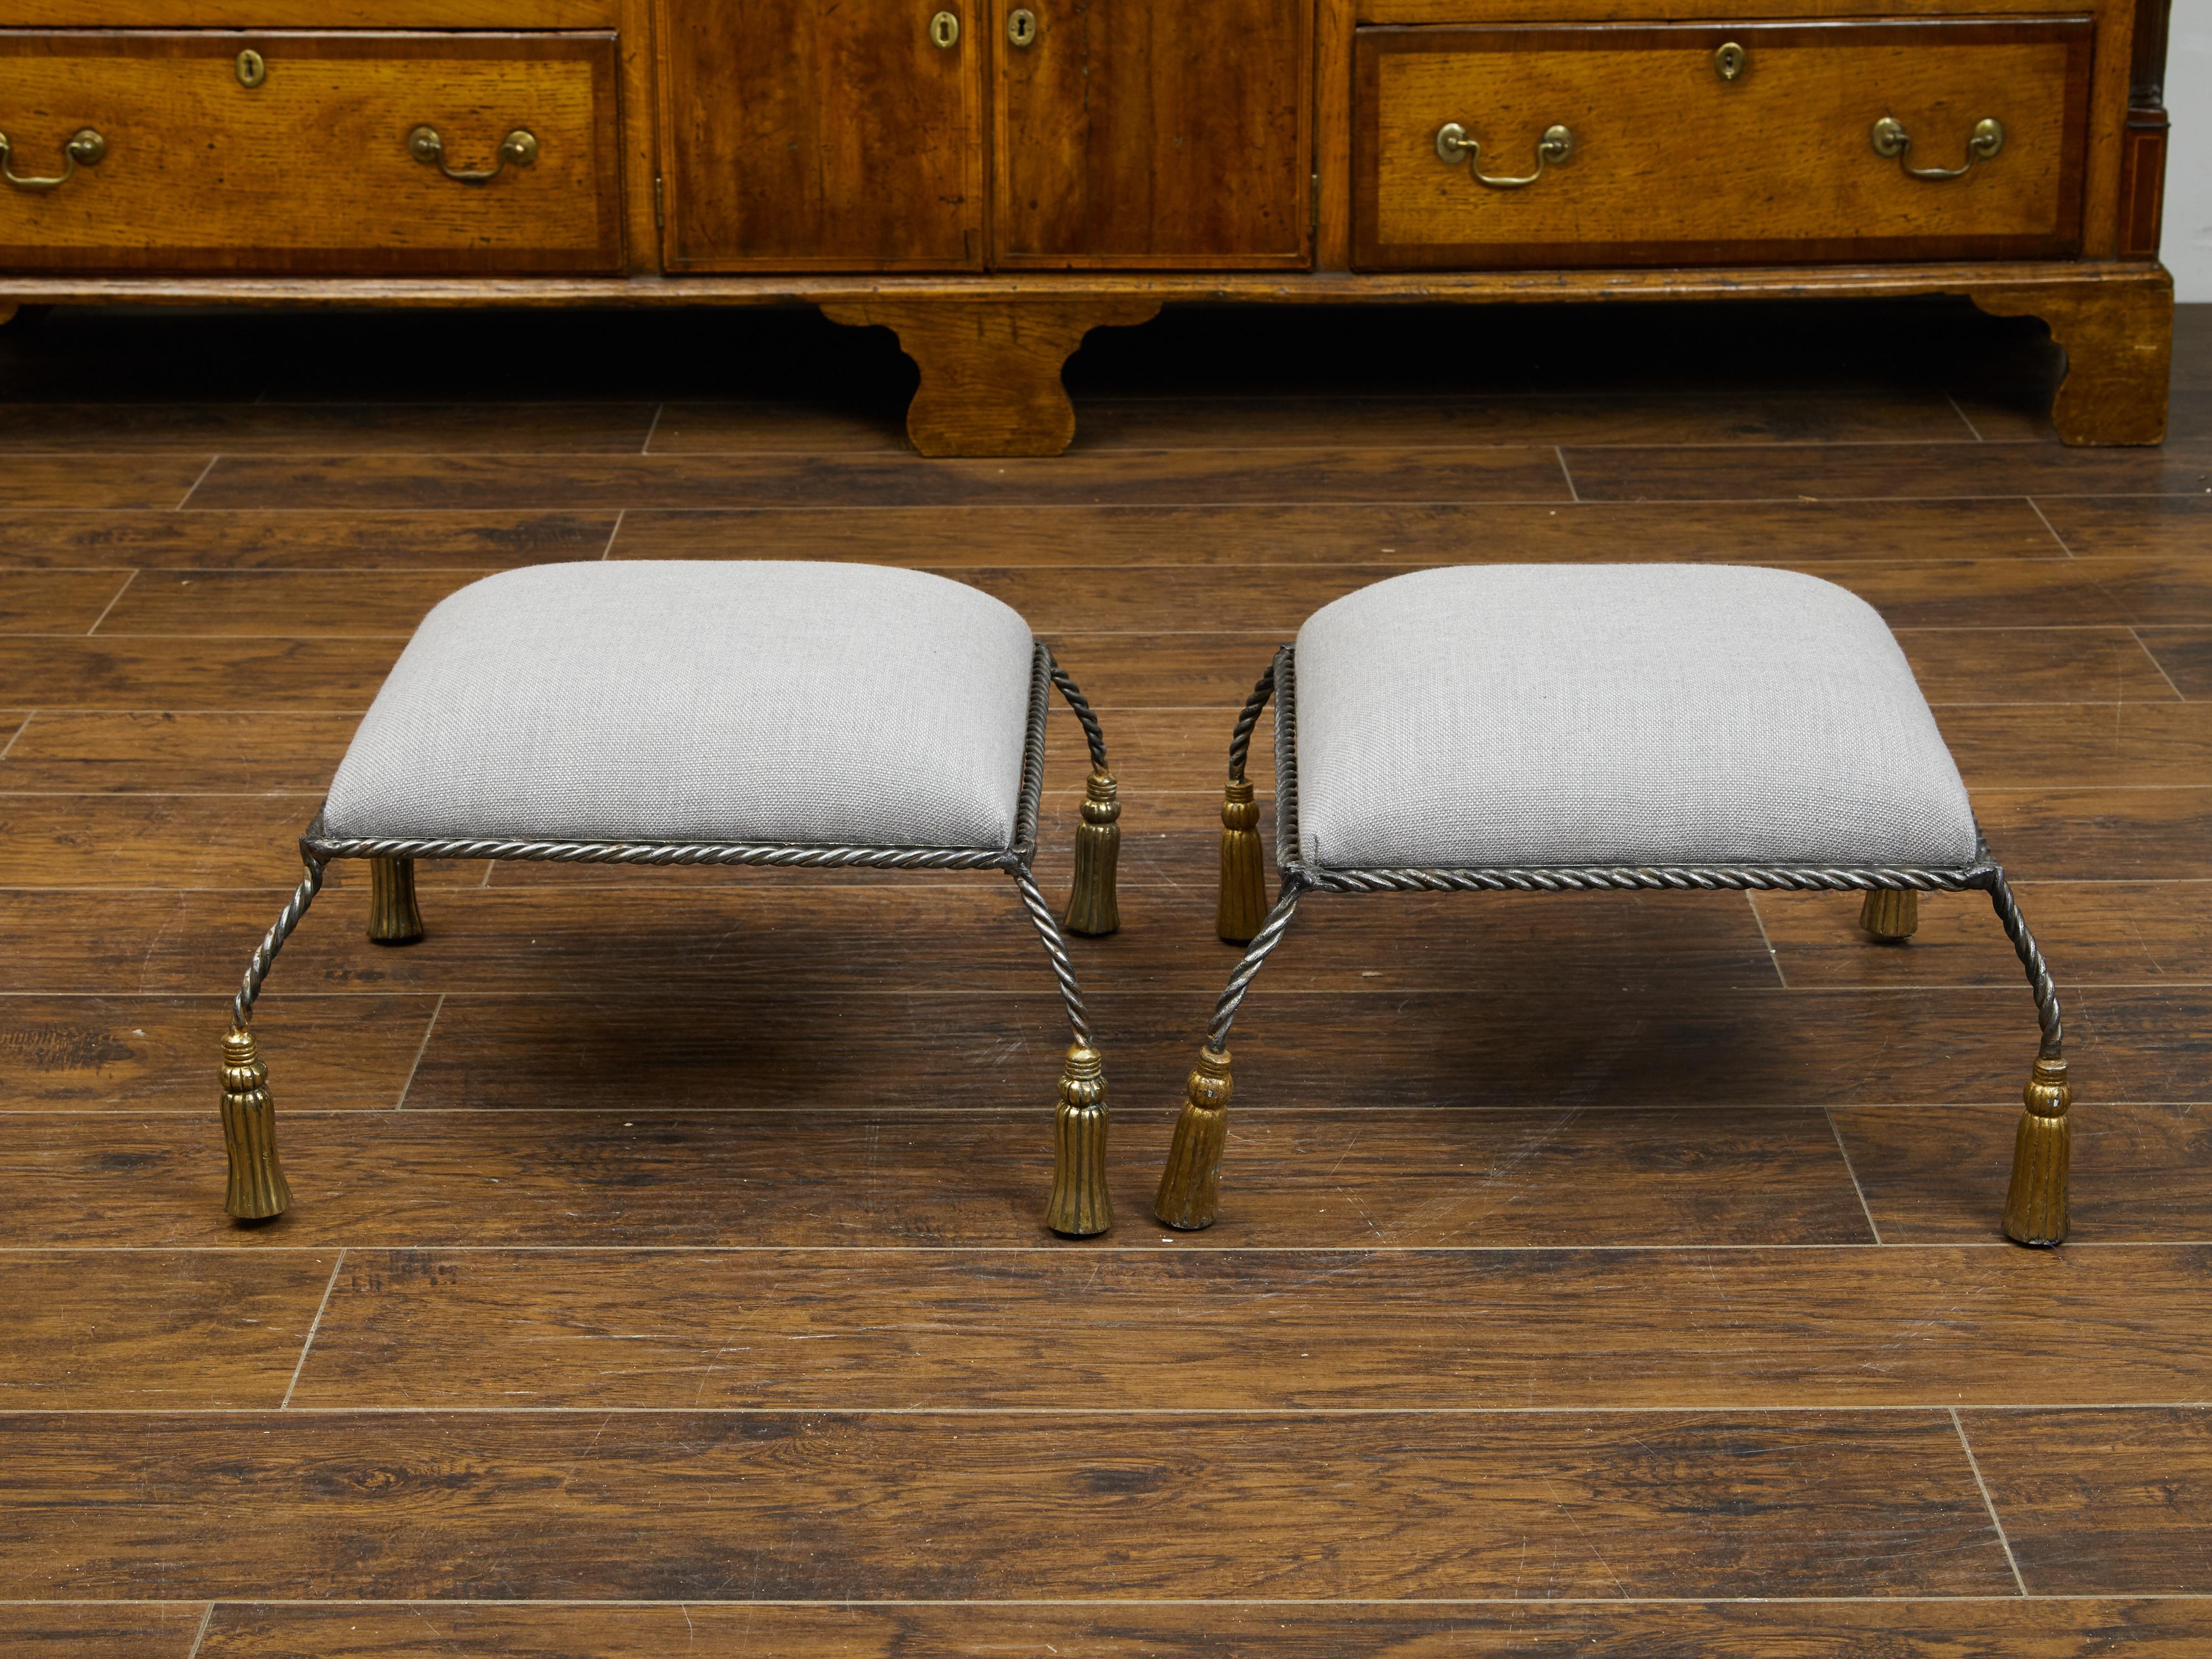 A pair of Italian vintage metal stools from the mid 20th century, with carved wooden tassels and new upholstery. Created in Italy during the midcentury period, each of this pair of stools features a square top reupholstered with a light grey fabric.